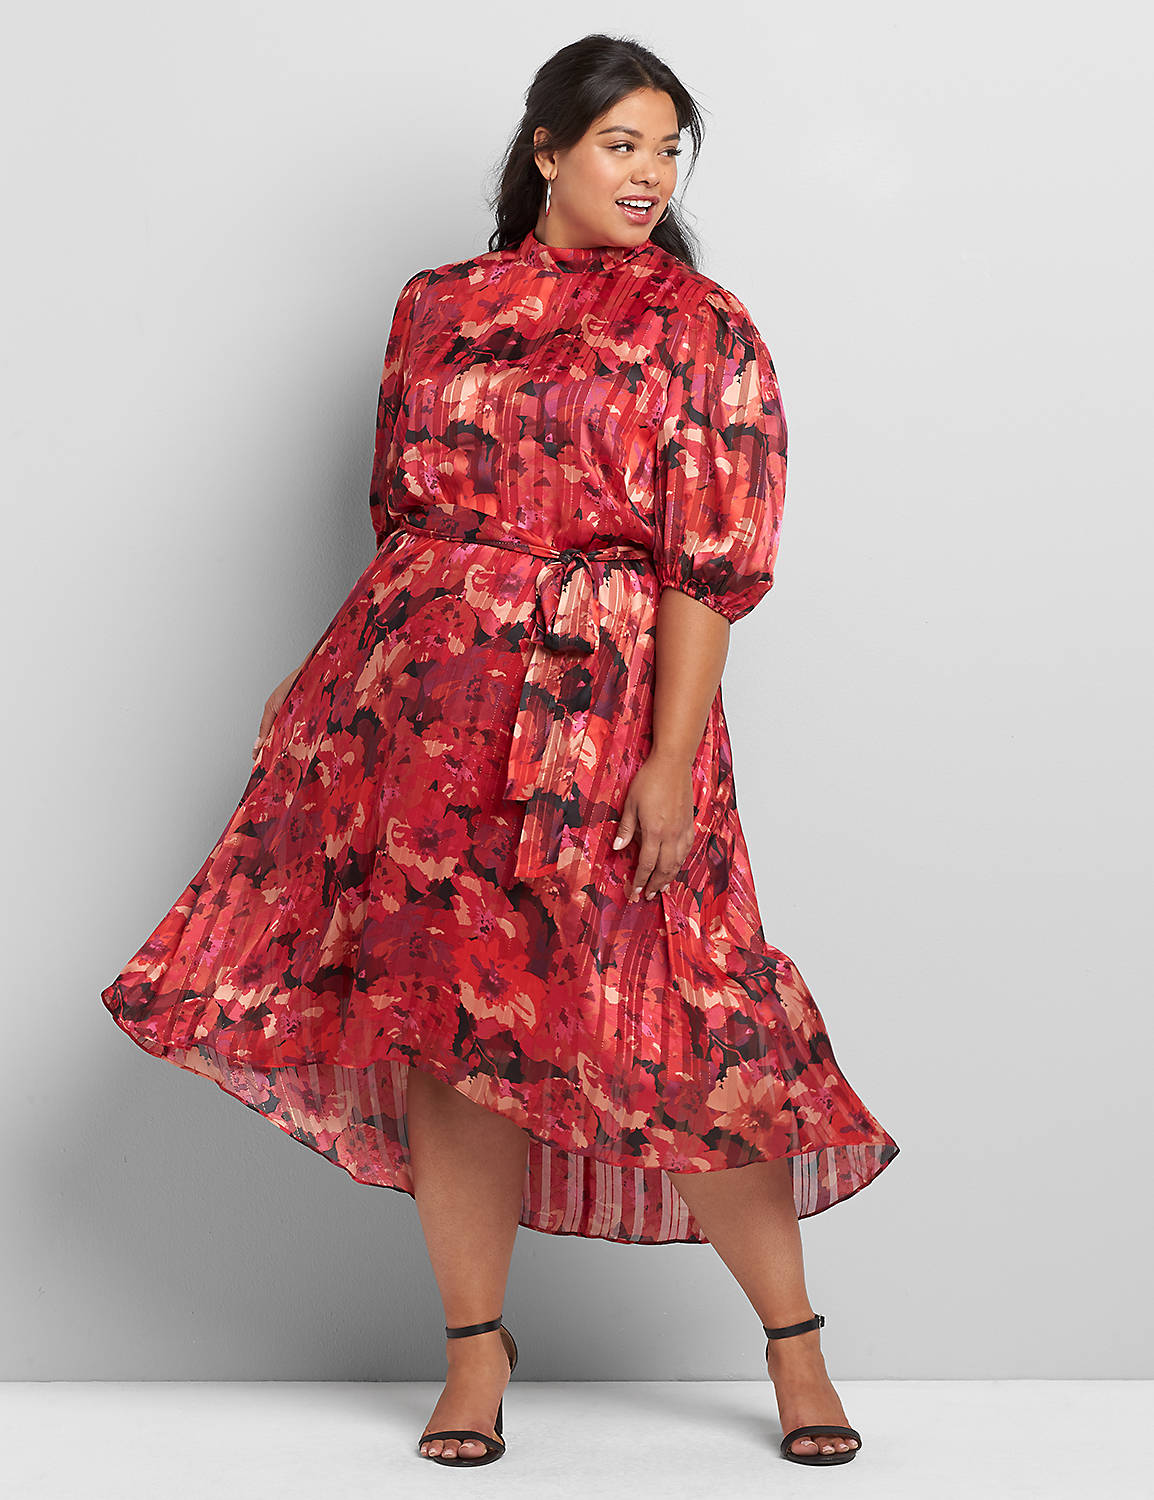 LONG SLEEVE STANDARD COLLAR ALL OVER SHADOW STRIPE FLORAL WITH BELT DRESS 1118237:GABBY SKYE RED PINK FLORAL- AS HEADER: Product Image 1